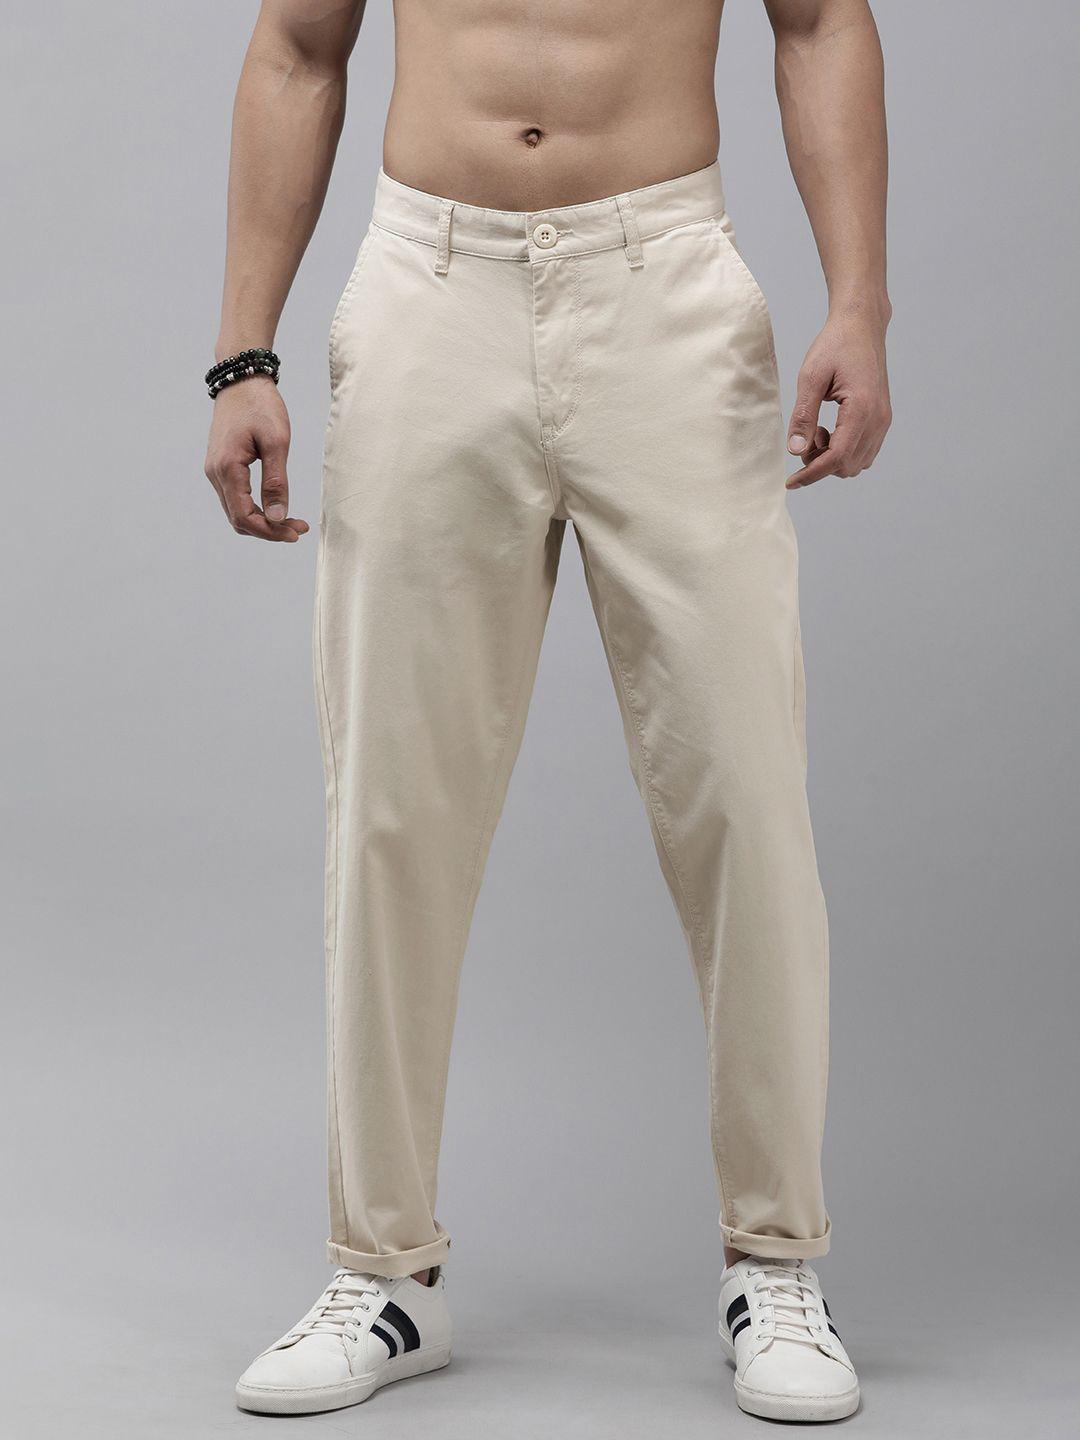 the roadster lifestyle co. men flat front loose fit chinos trousers